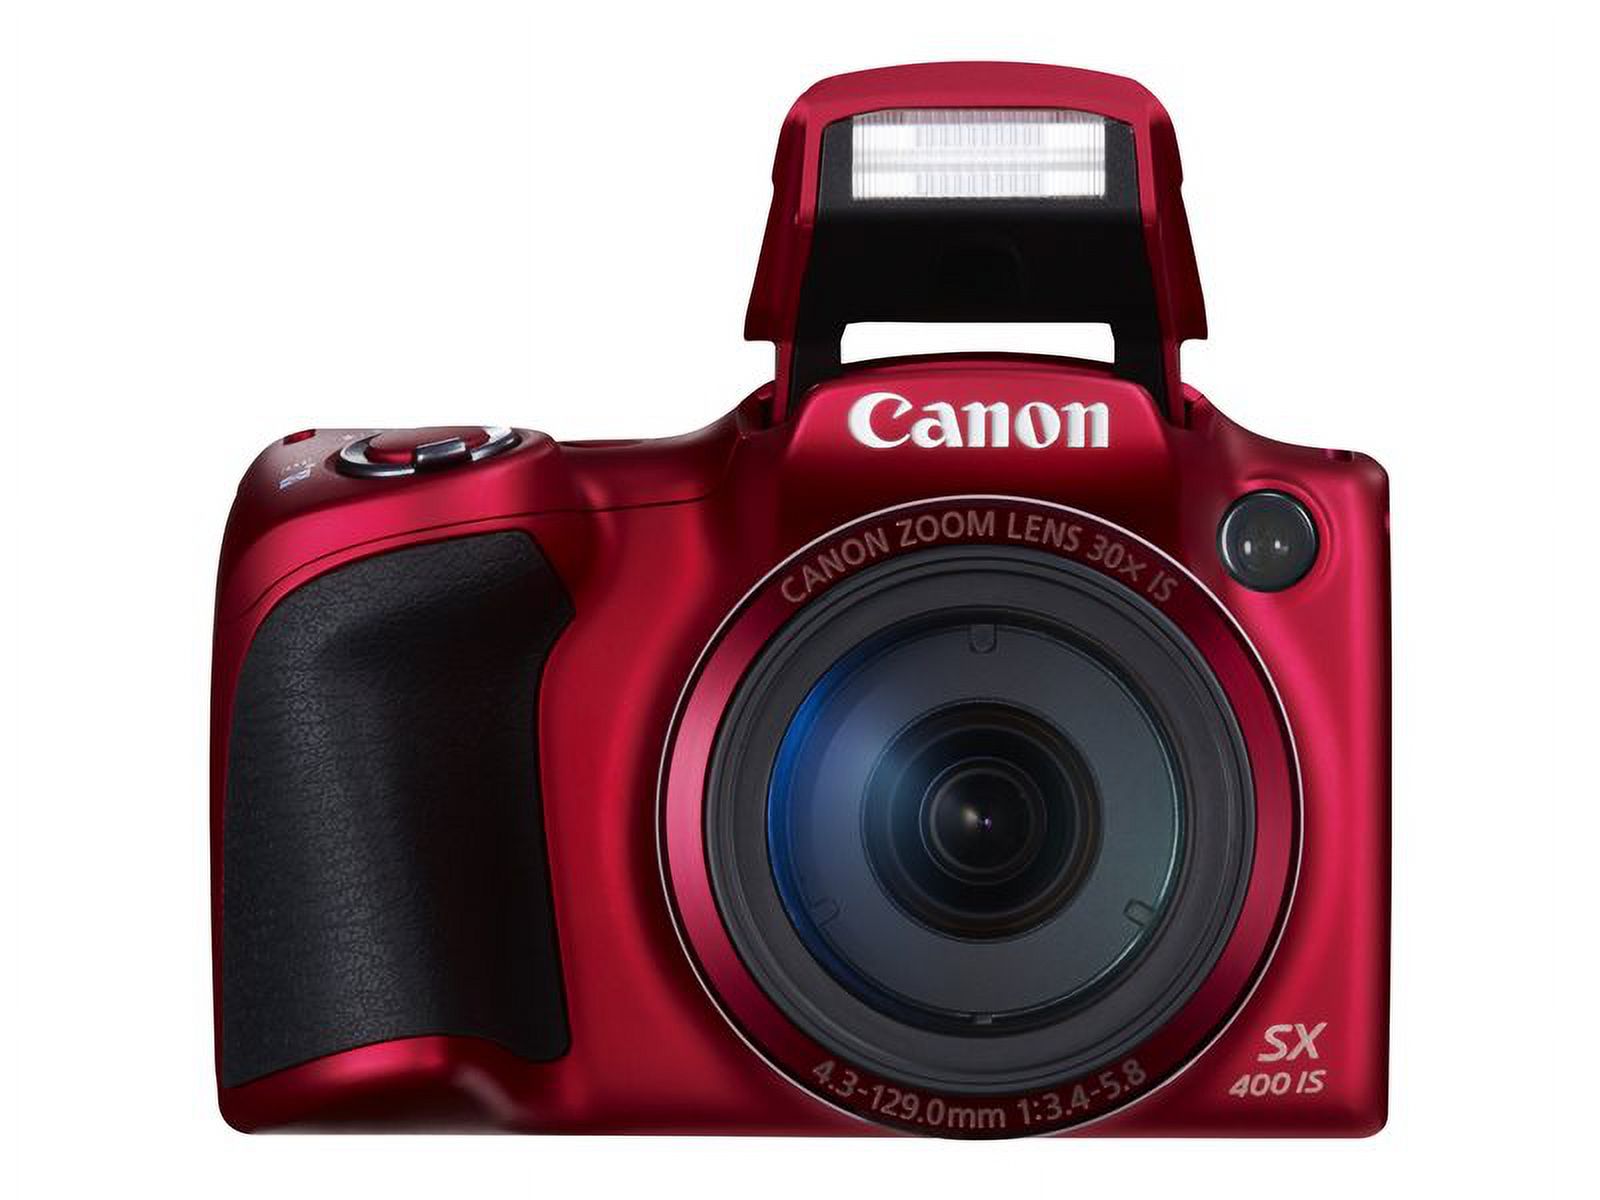 Canon PowerShot SX400 IS - Digital camera - High Definition - compact - 16.0 MP - 30 x optical zoom - red - image 69 of 72